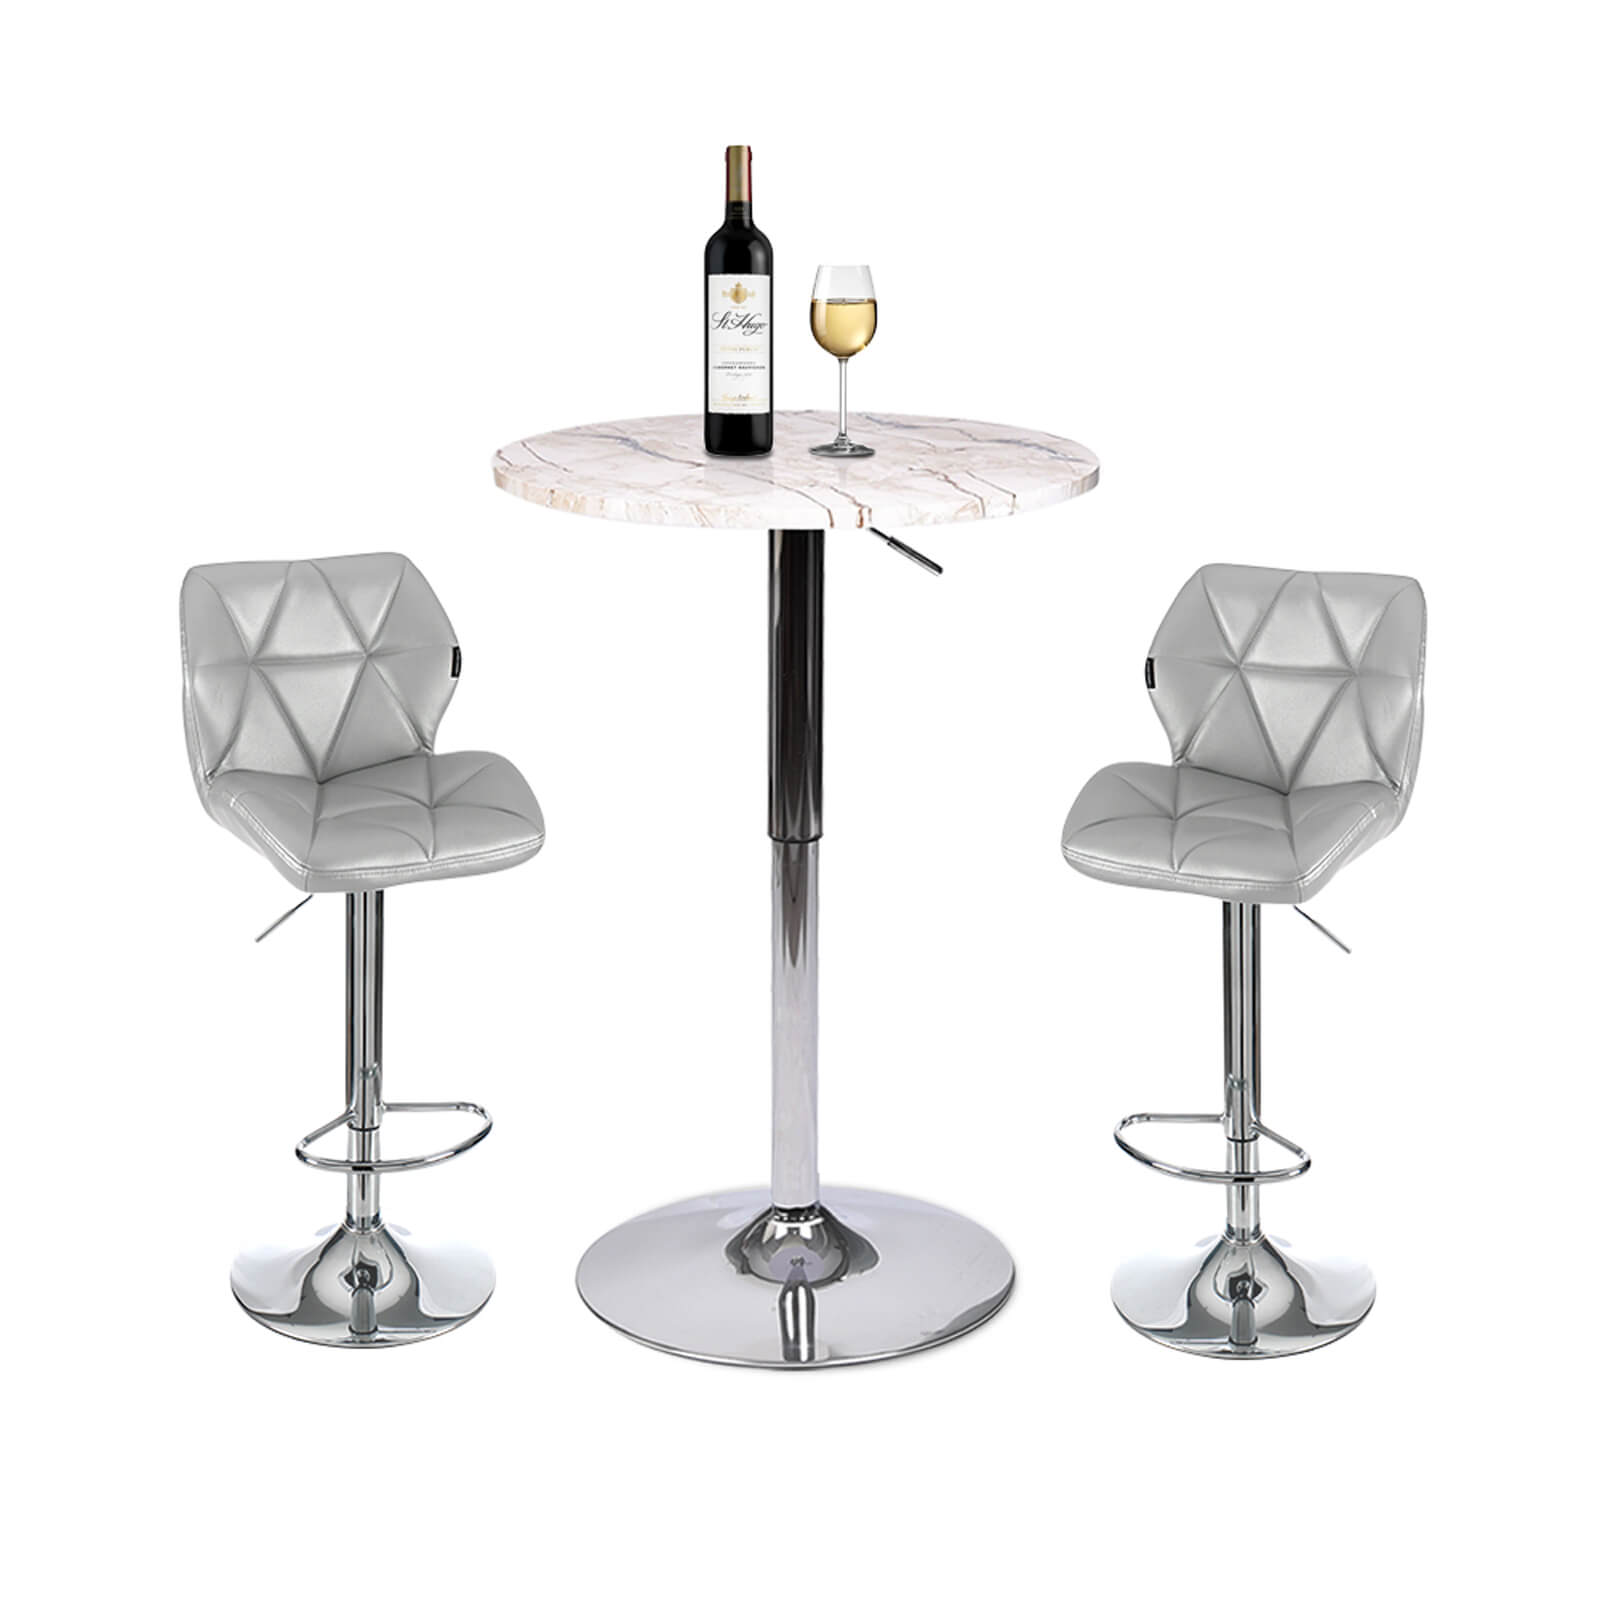 Elecwish Bar Table Set 3-Piece OW0301 marble white bar table with silver bar stools